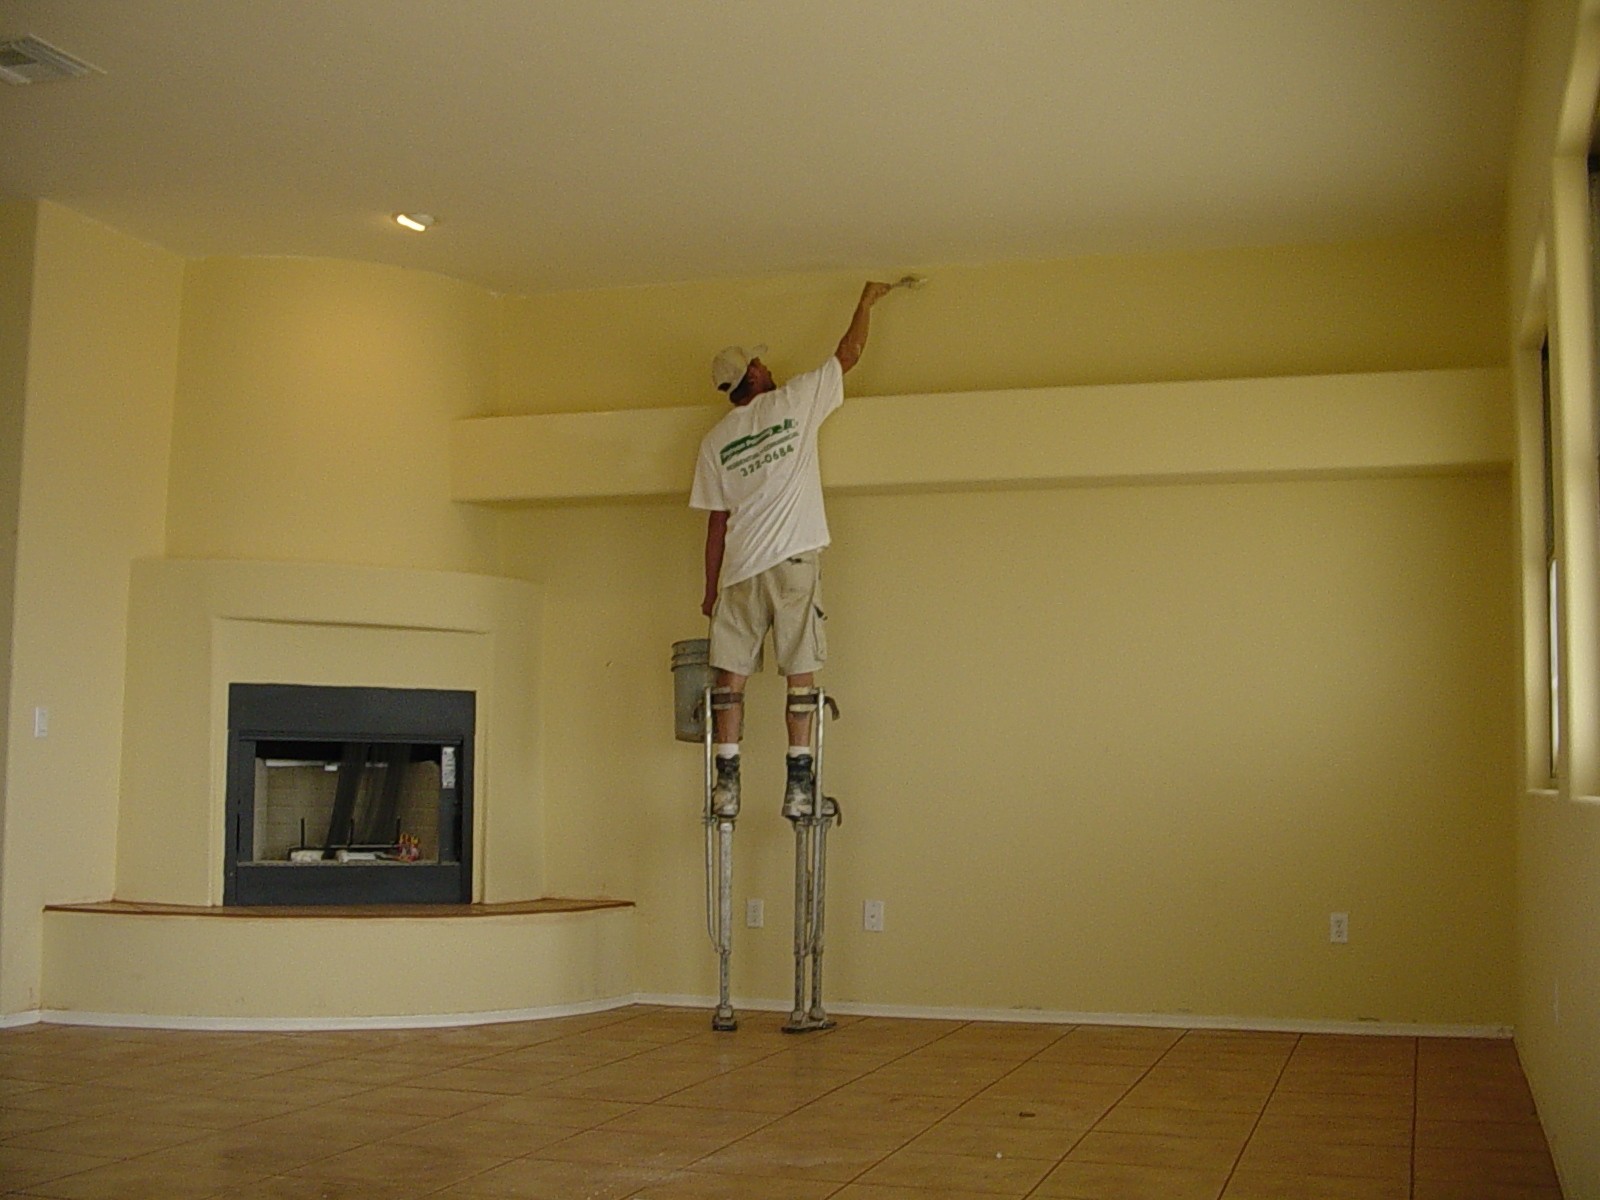 Residential Painting-Pearland TX Professional Painting Contractors-We offer Residential & Commercial Painting, Interior Painting, Exterior Painting, Primer Painting, Industrial Painting, Professional Painters, Institutional Painters, and more.